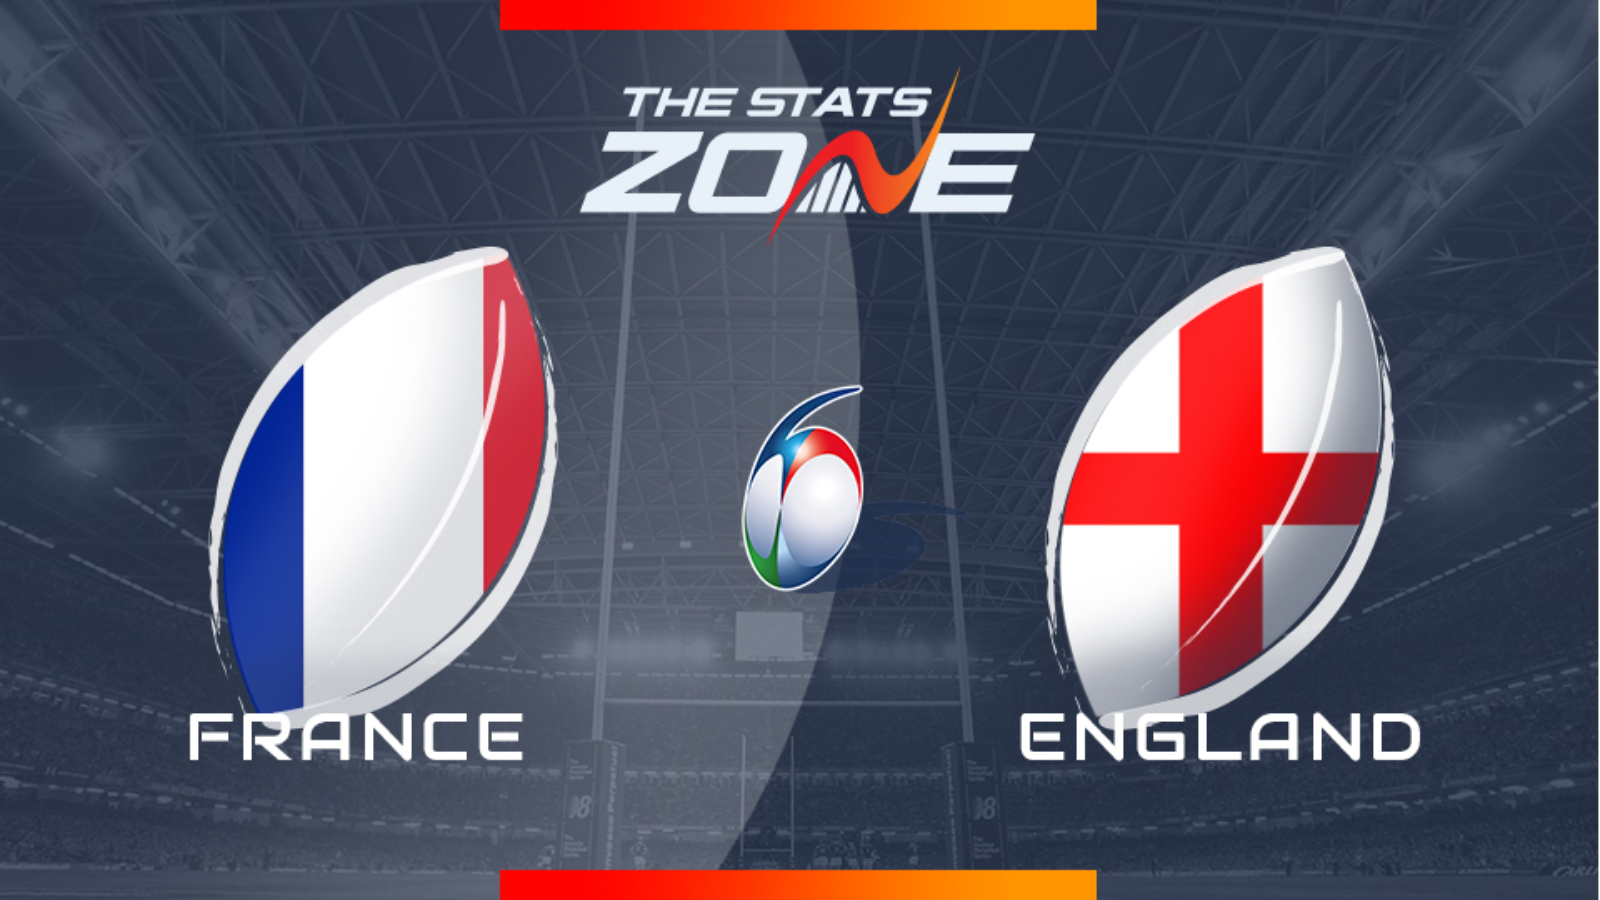 2020 Six Nations Championship – France vs England Preview & Prediction - The Stats Zone